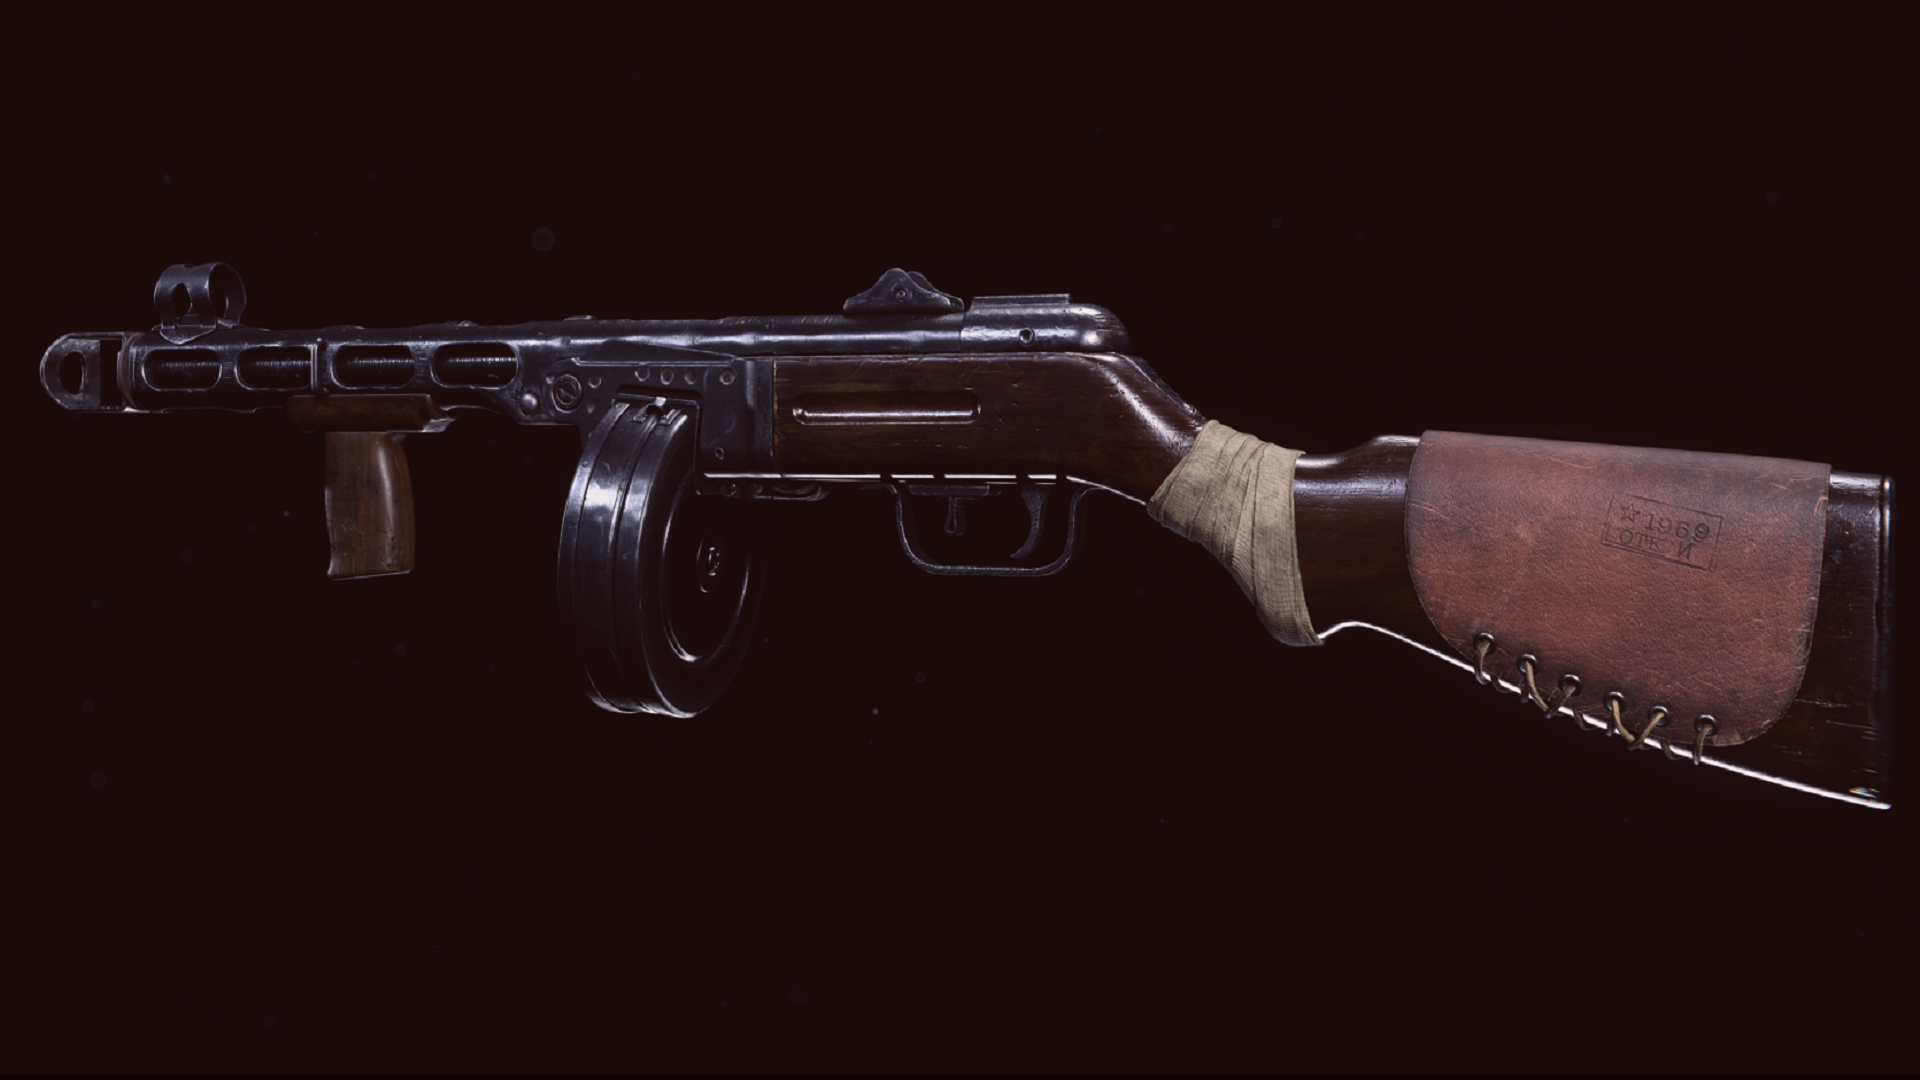 The PPSh SMG in Warzone